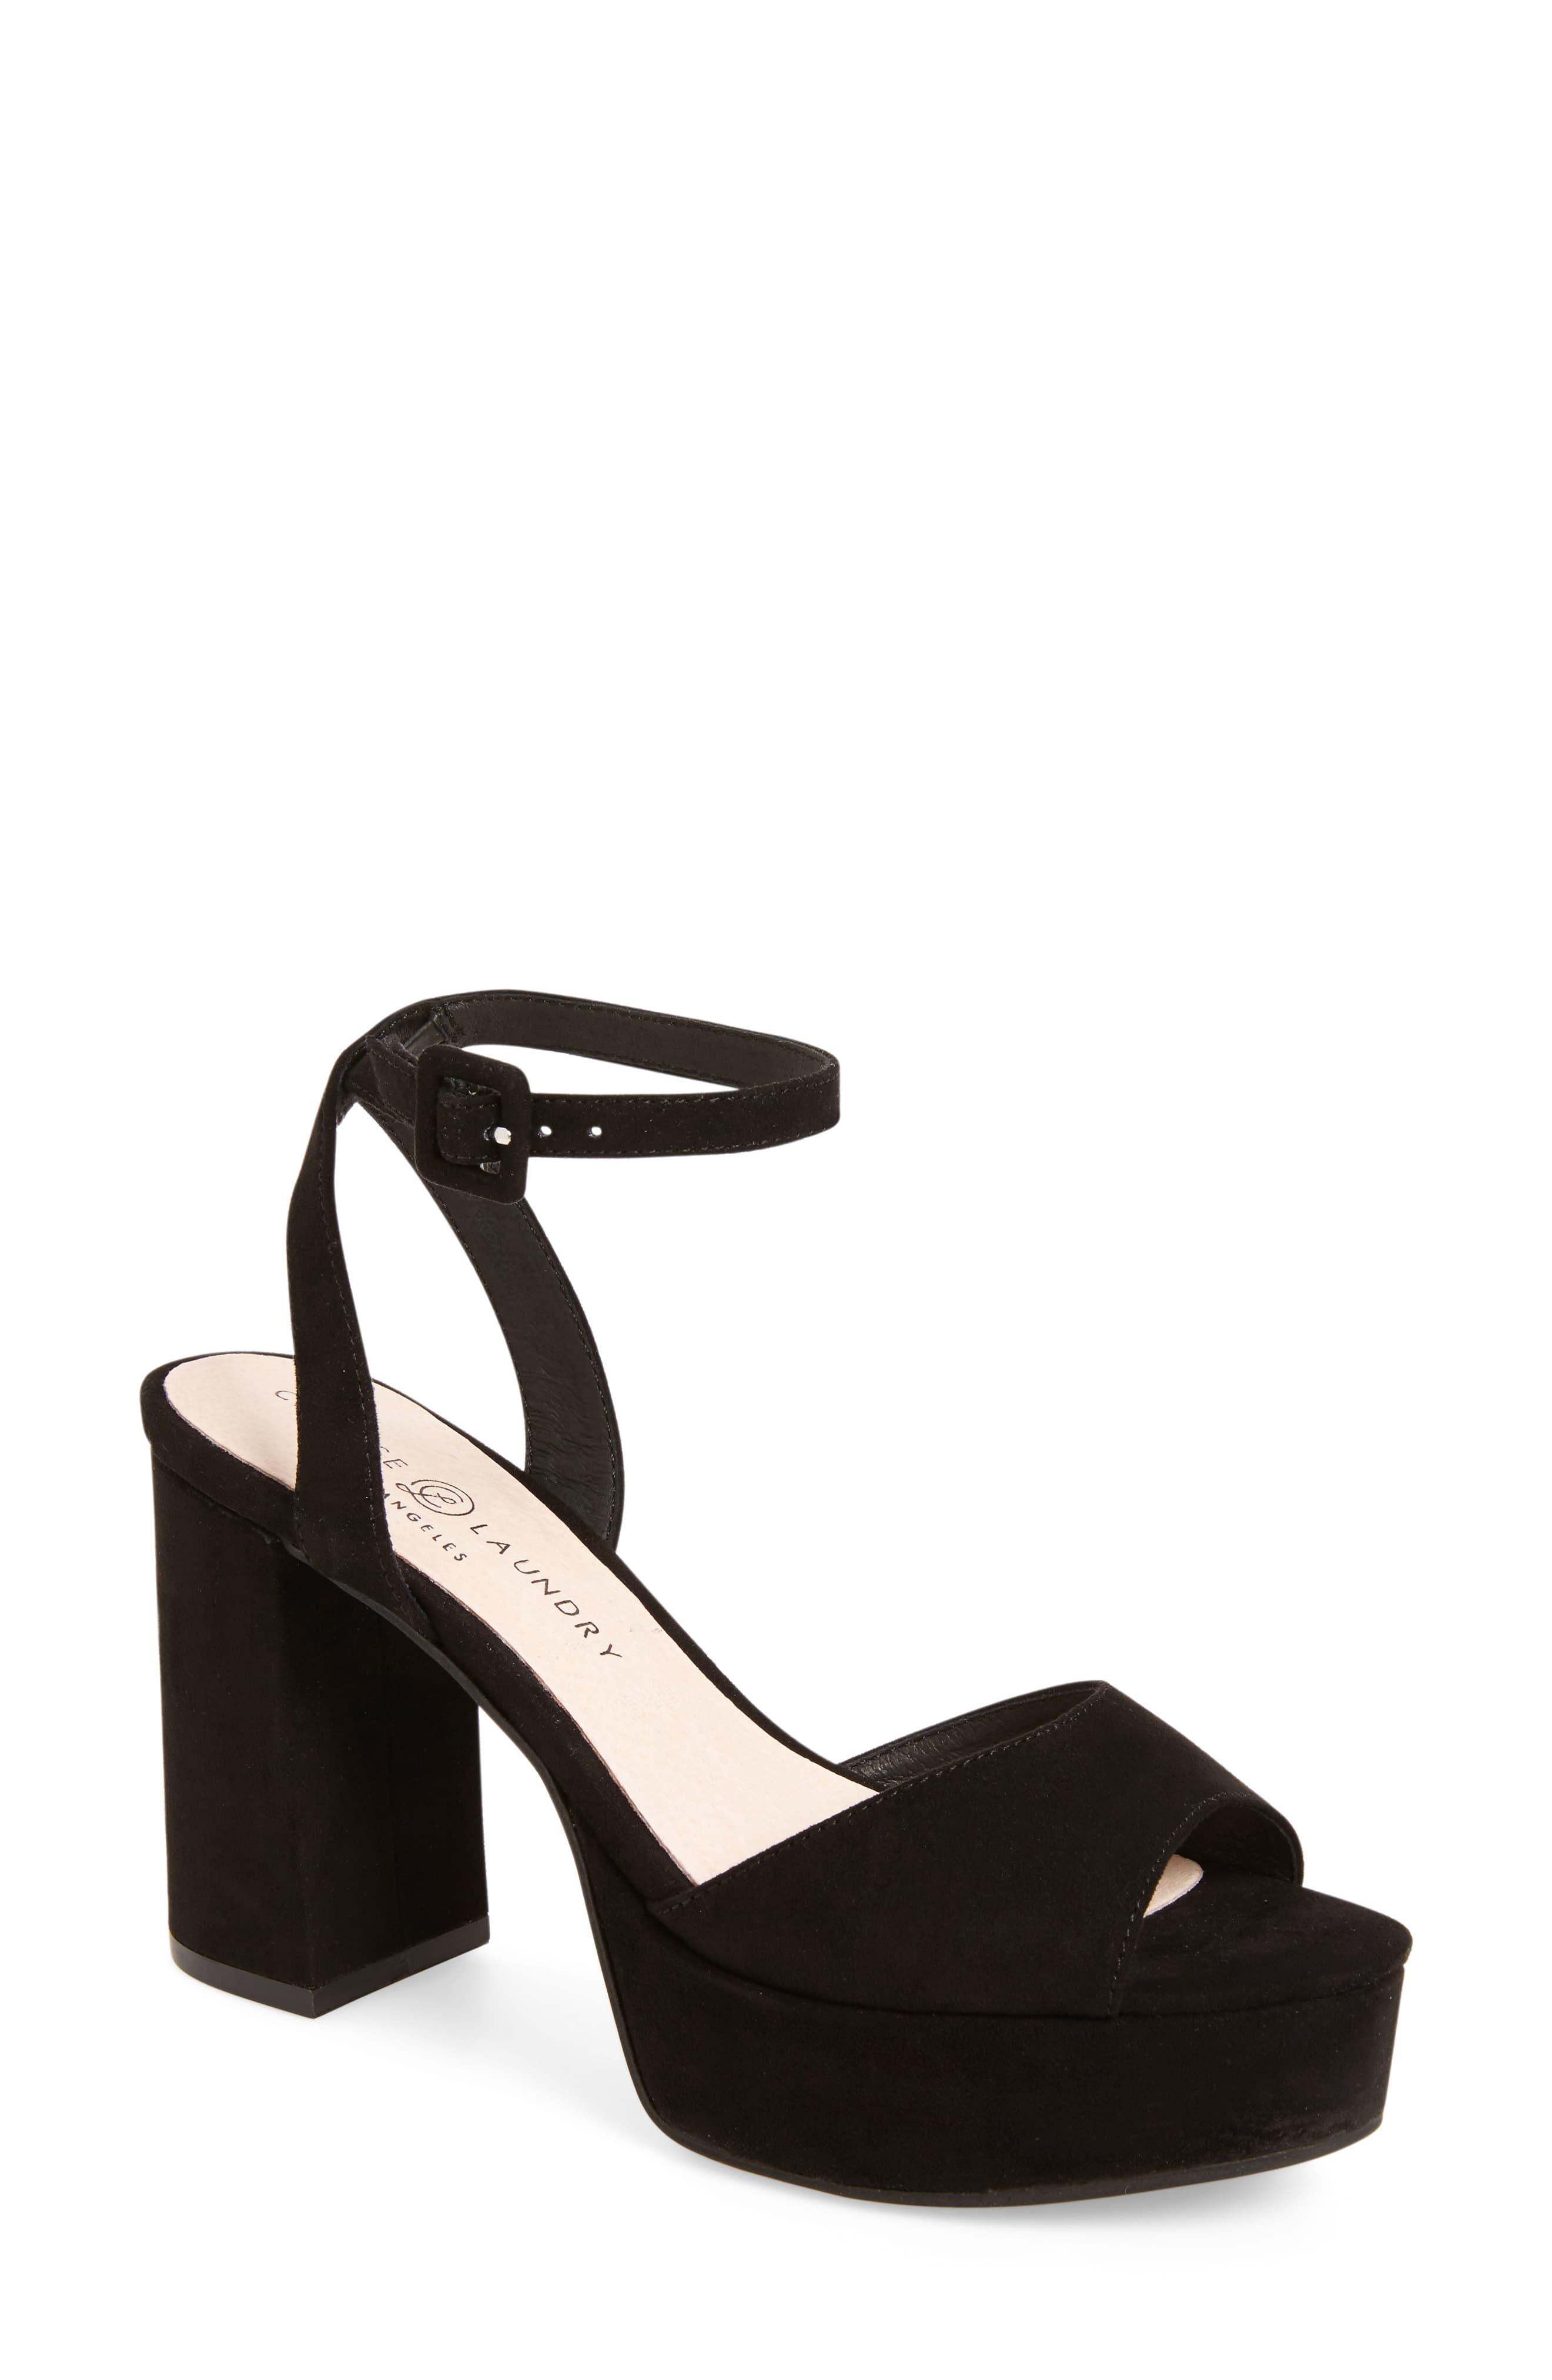 Chinese Laundry Theresa Platform Sandal in Black - Save 43% - Lyst